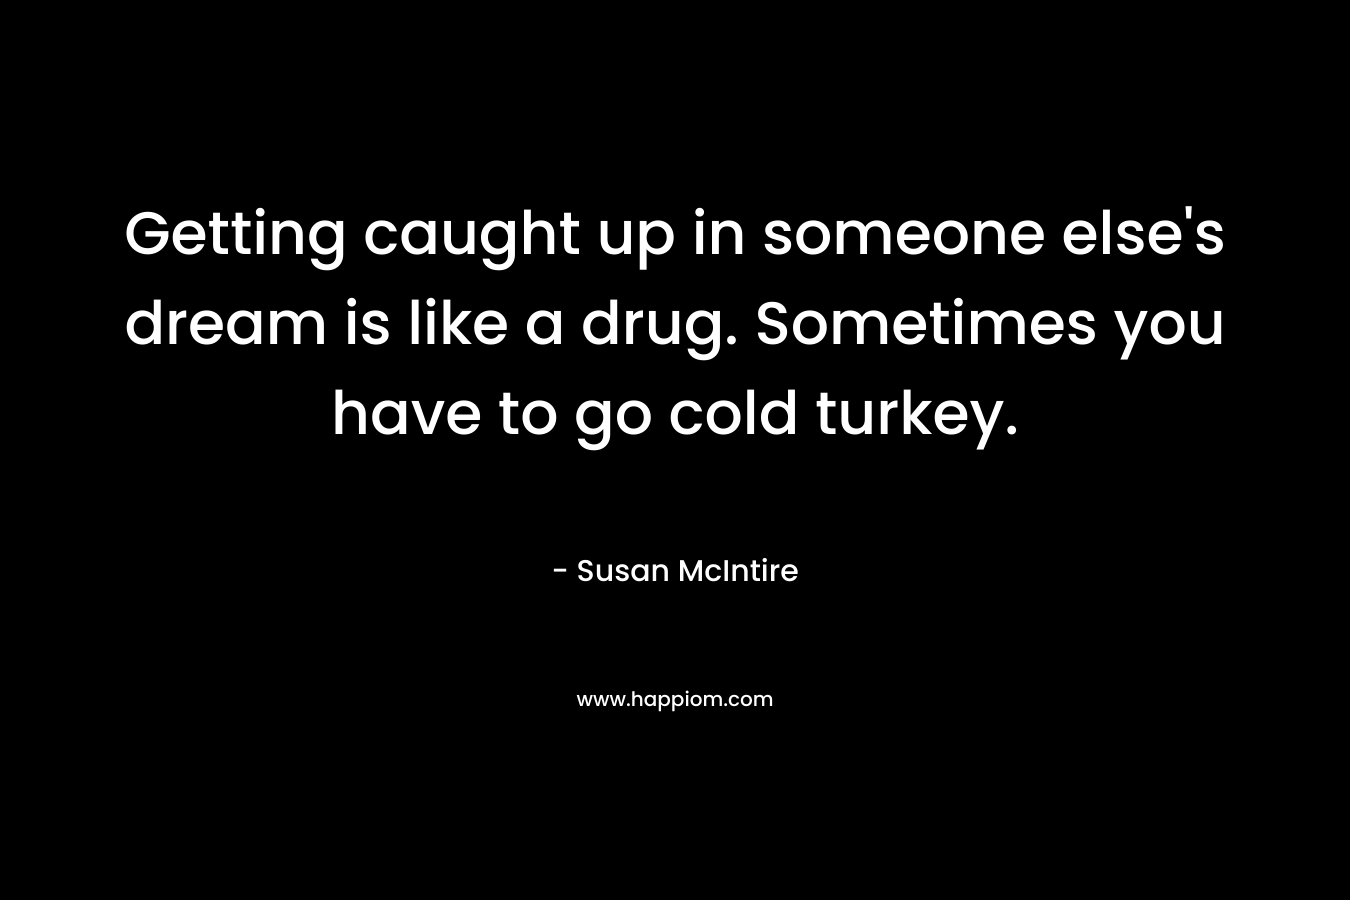 Getting caught up in someone else's dream is like a drug. Sometimes you have to go cold turkey.